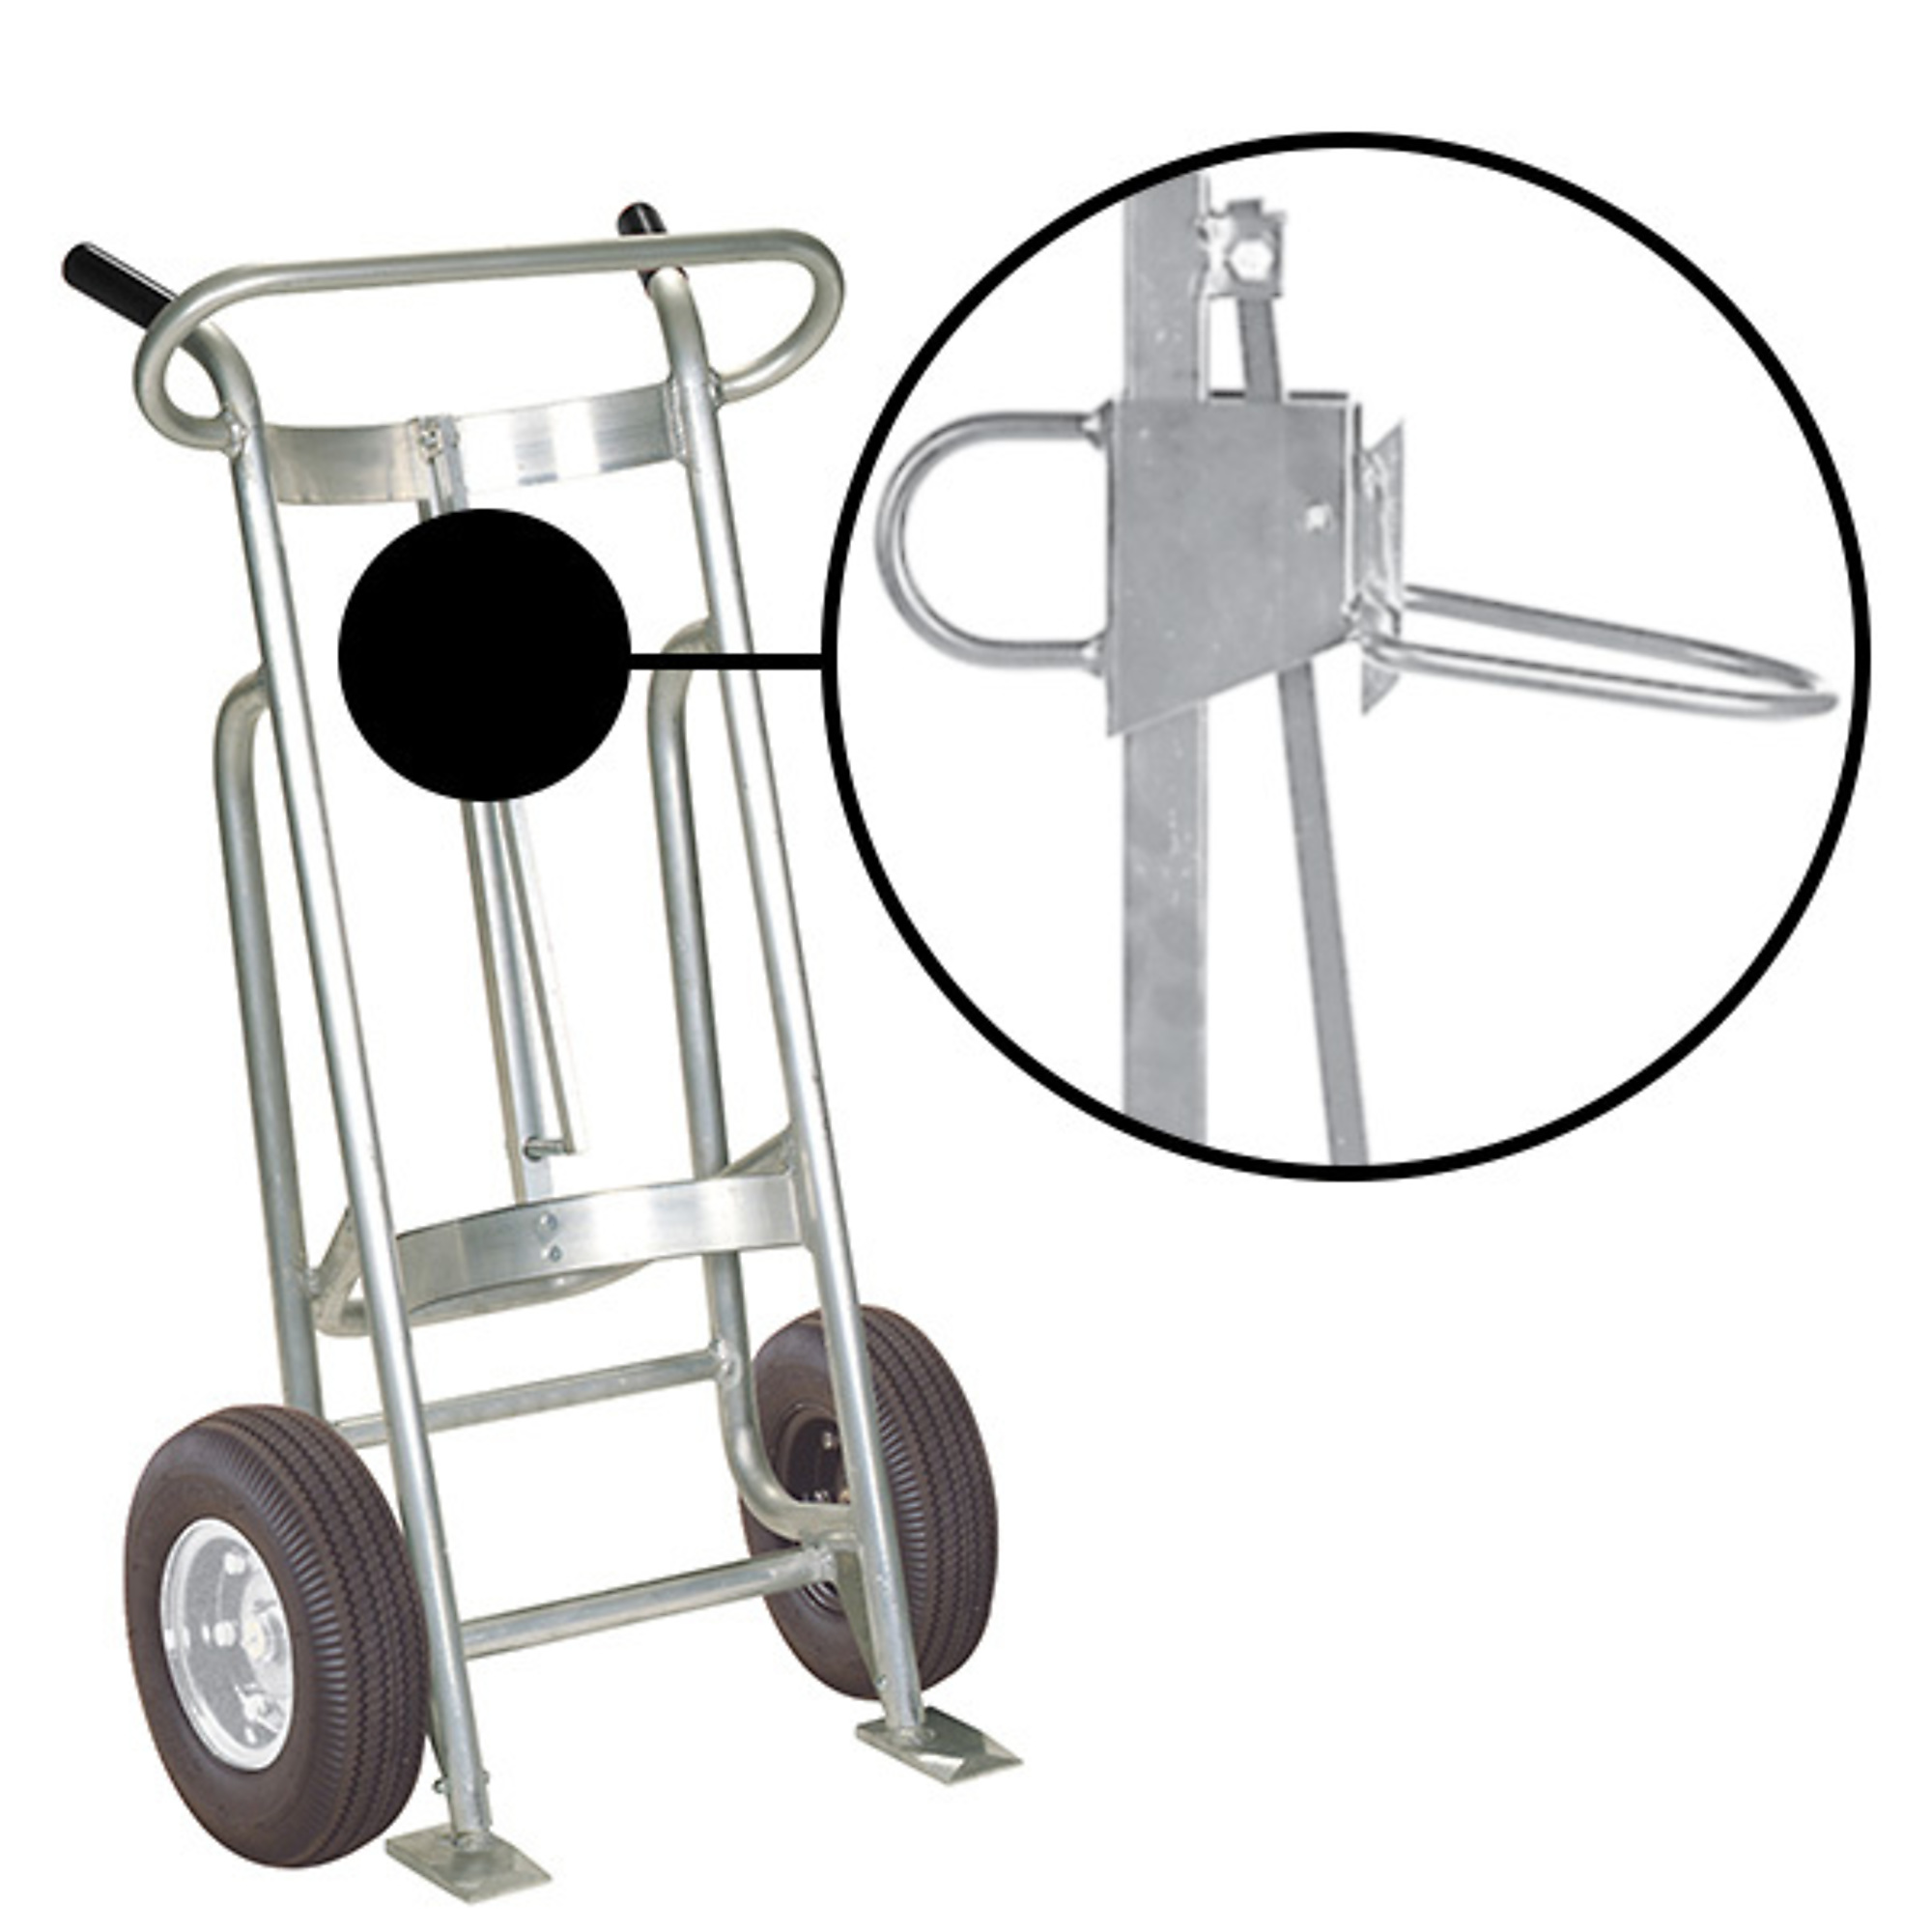 Valley Craft, 2-Wheel Drum Hand Truck, Load Capacity 1000 lb, Height 52 in, Material Aluminum, Model F81500A0P